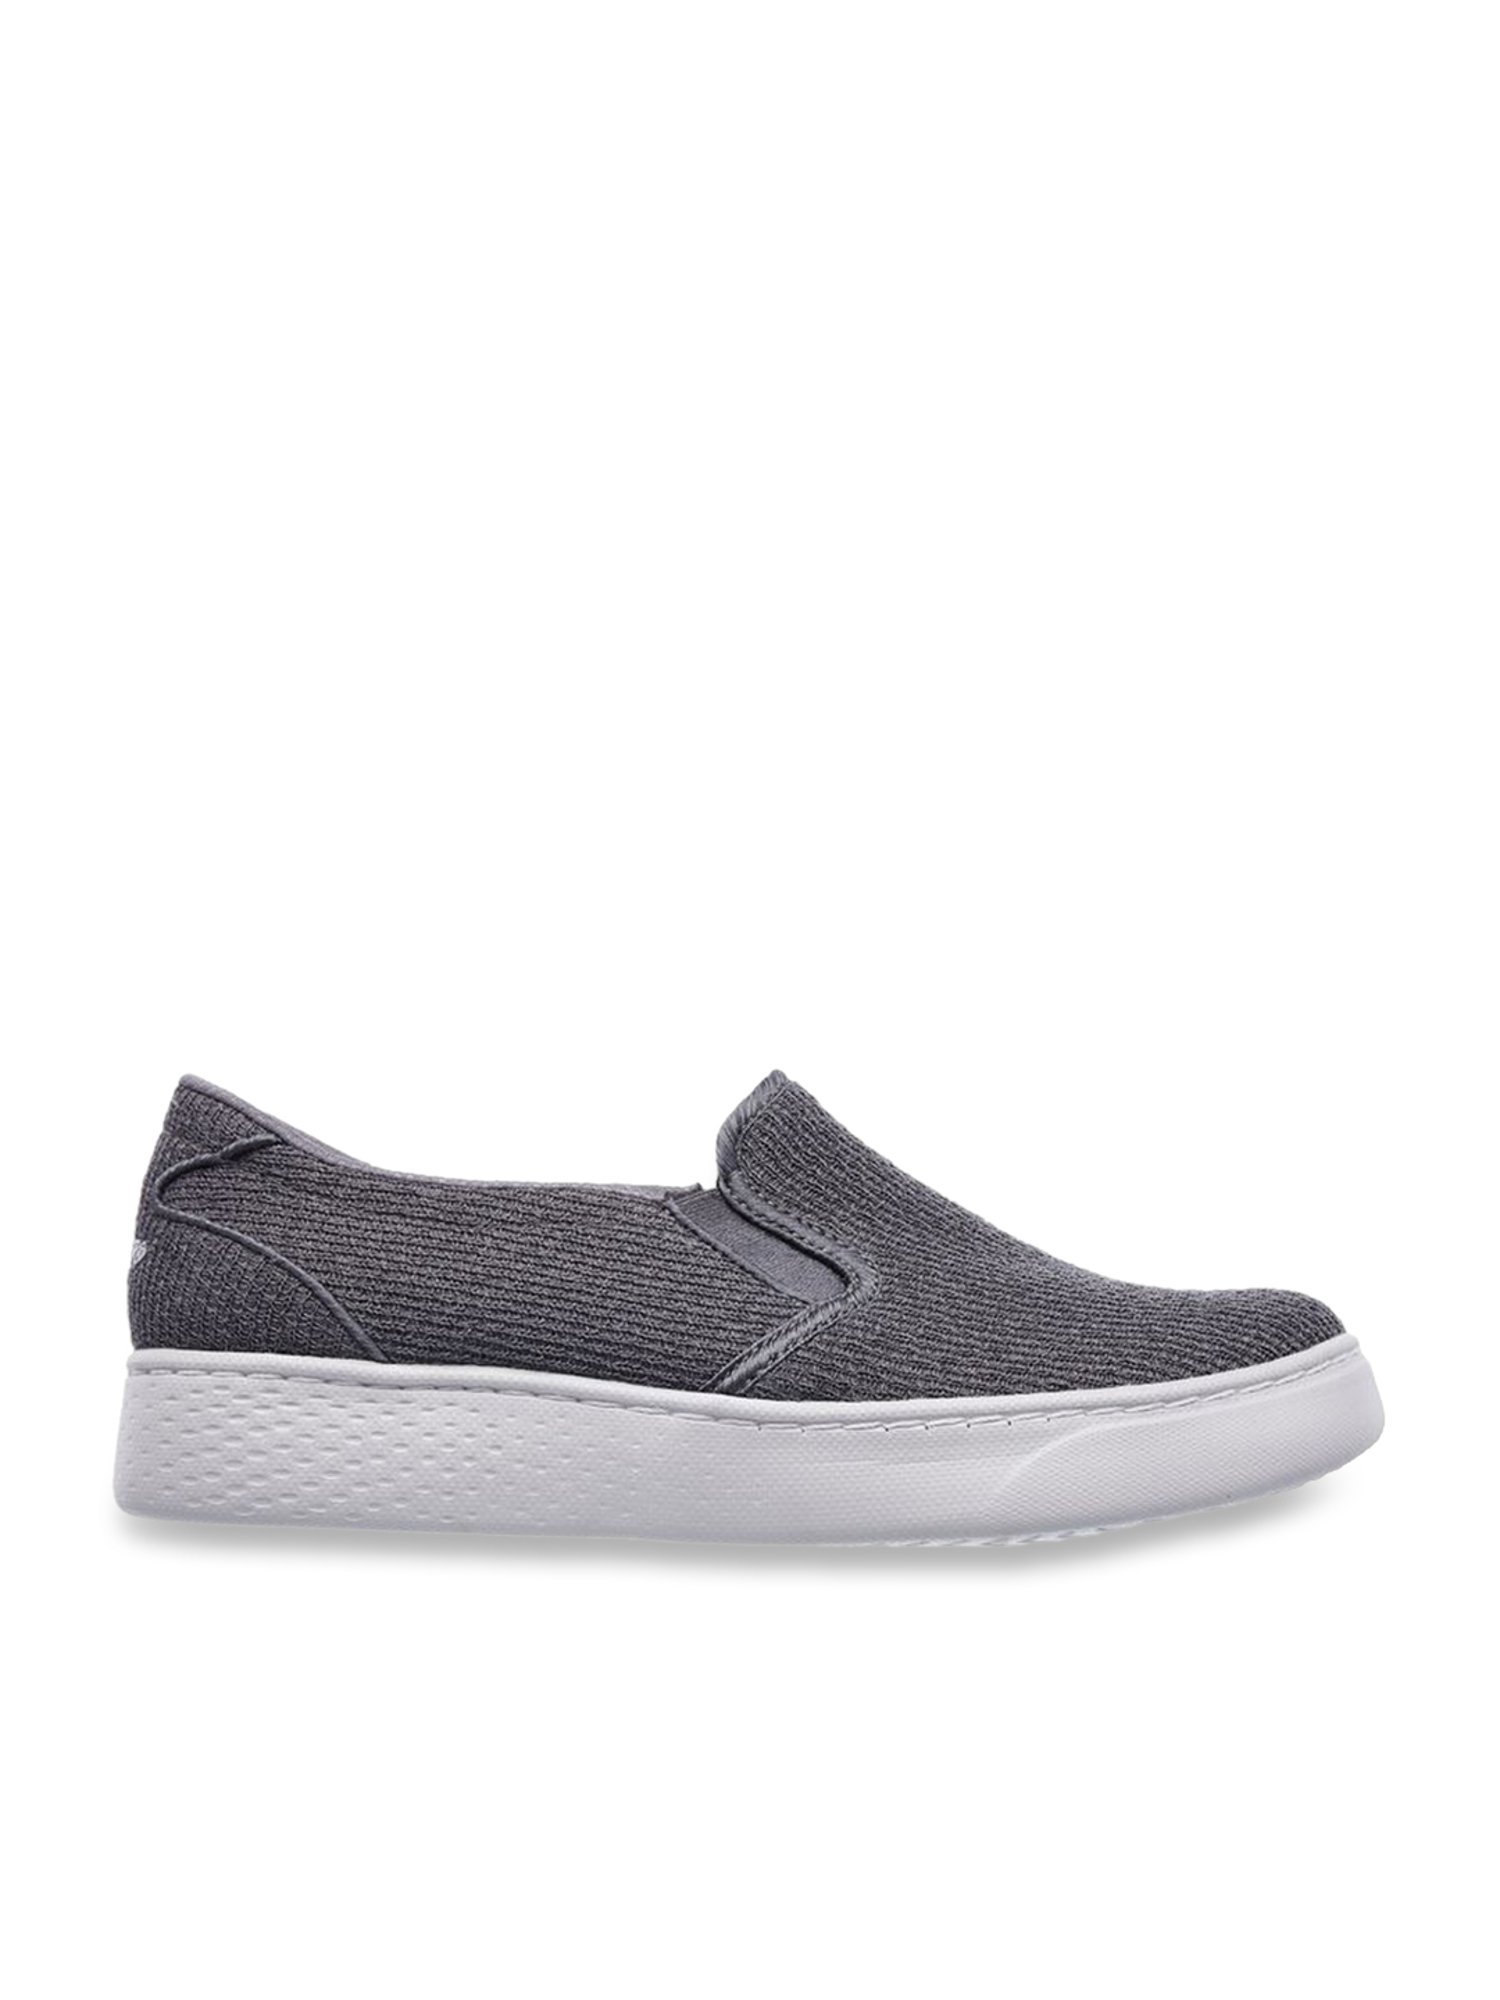 Women's Couriers - Medium Grey/Light Grey (Natural White Sole)